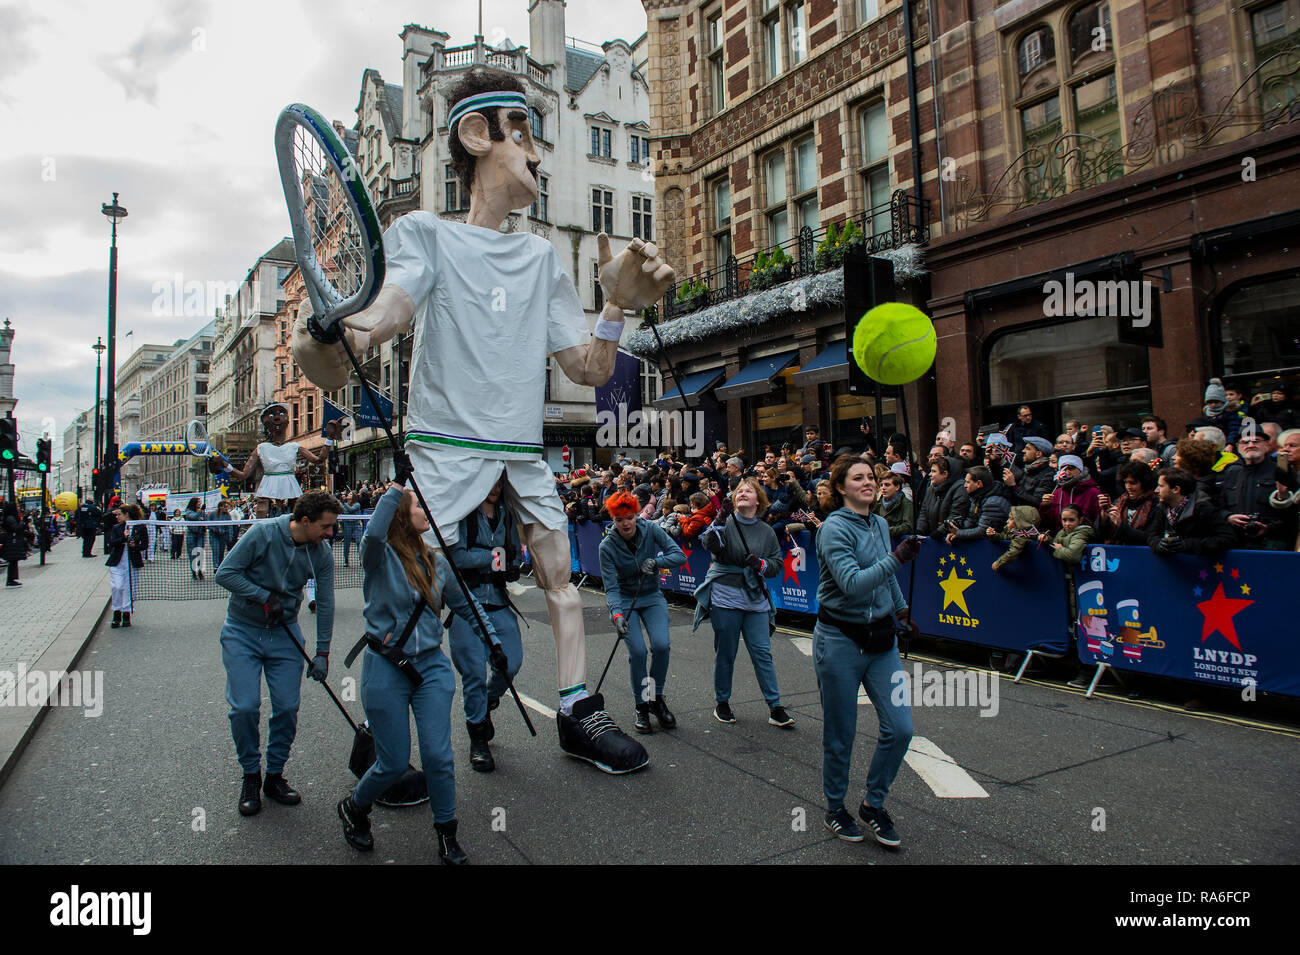 London, UK. 1st January, 2019. The London Borough of Merton - The New The New Years Day parade passes through central London. Credit: Guy Bell/Alamy Live News Stock Photo